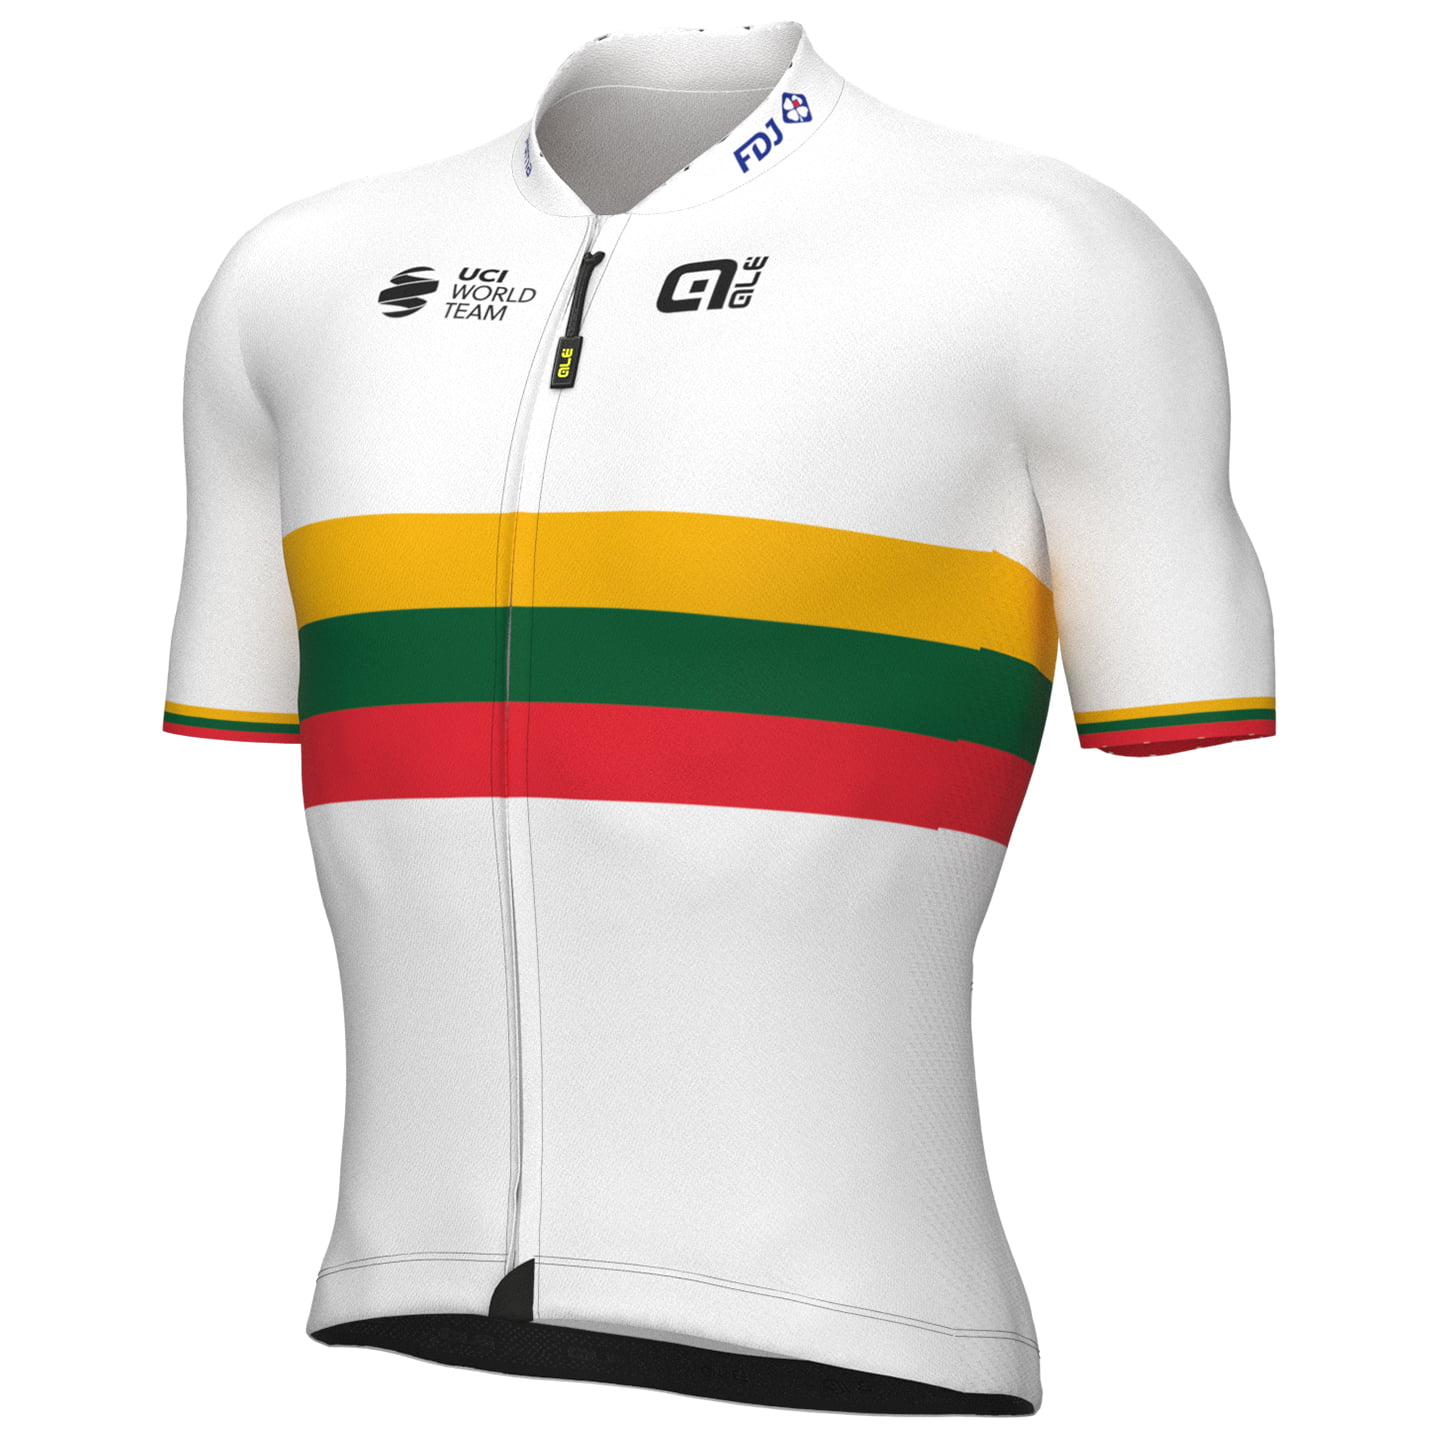 GROUPAMA-FDJ Lithuanian Champion 2022 Short Sleeve Jersey, for men, size M, Cycle jersey, Cycling clothing